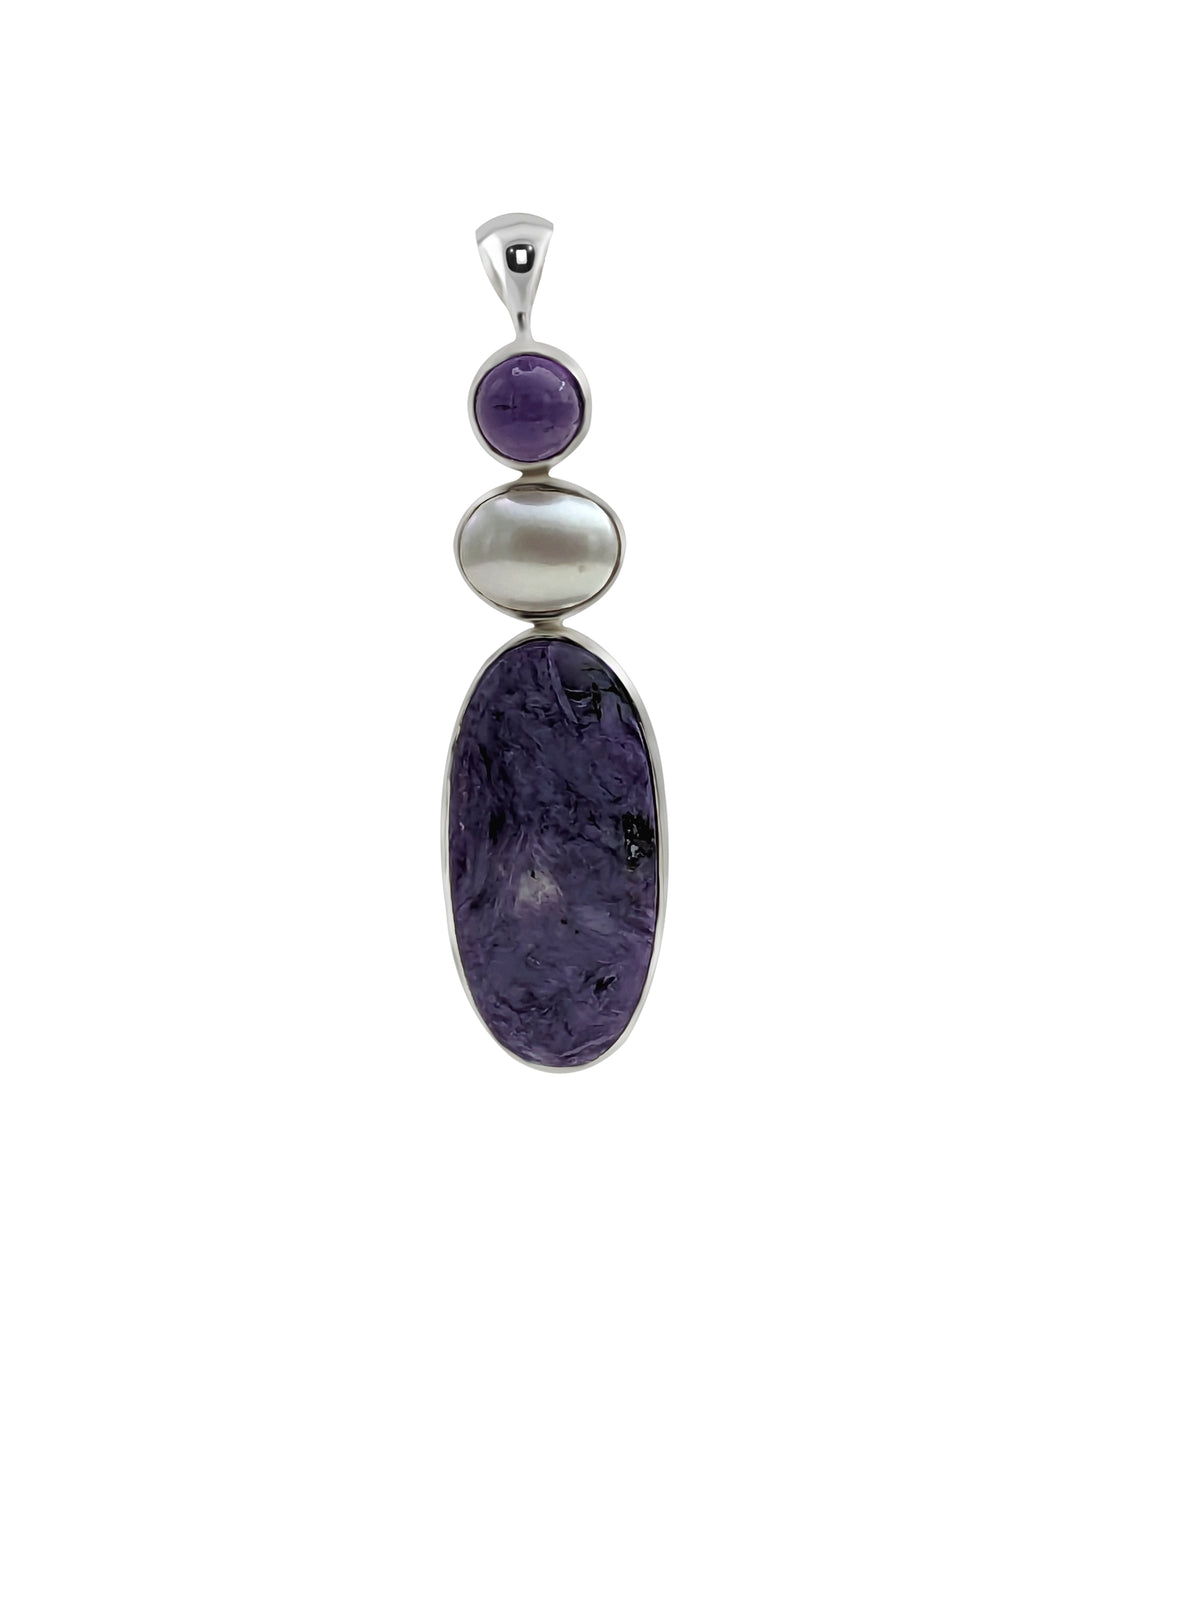 Designer Charoite Pendant Studded With Pearl, Amethyst Pack of 1 (D23-4)